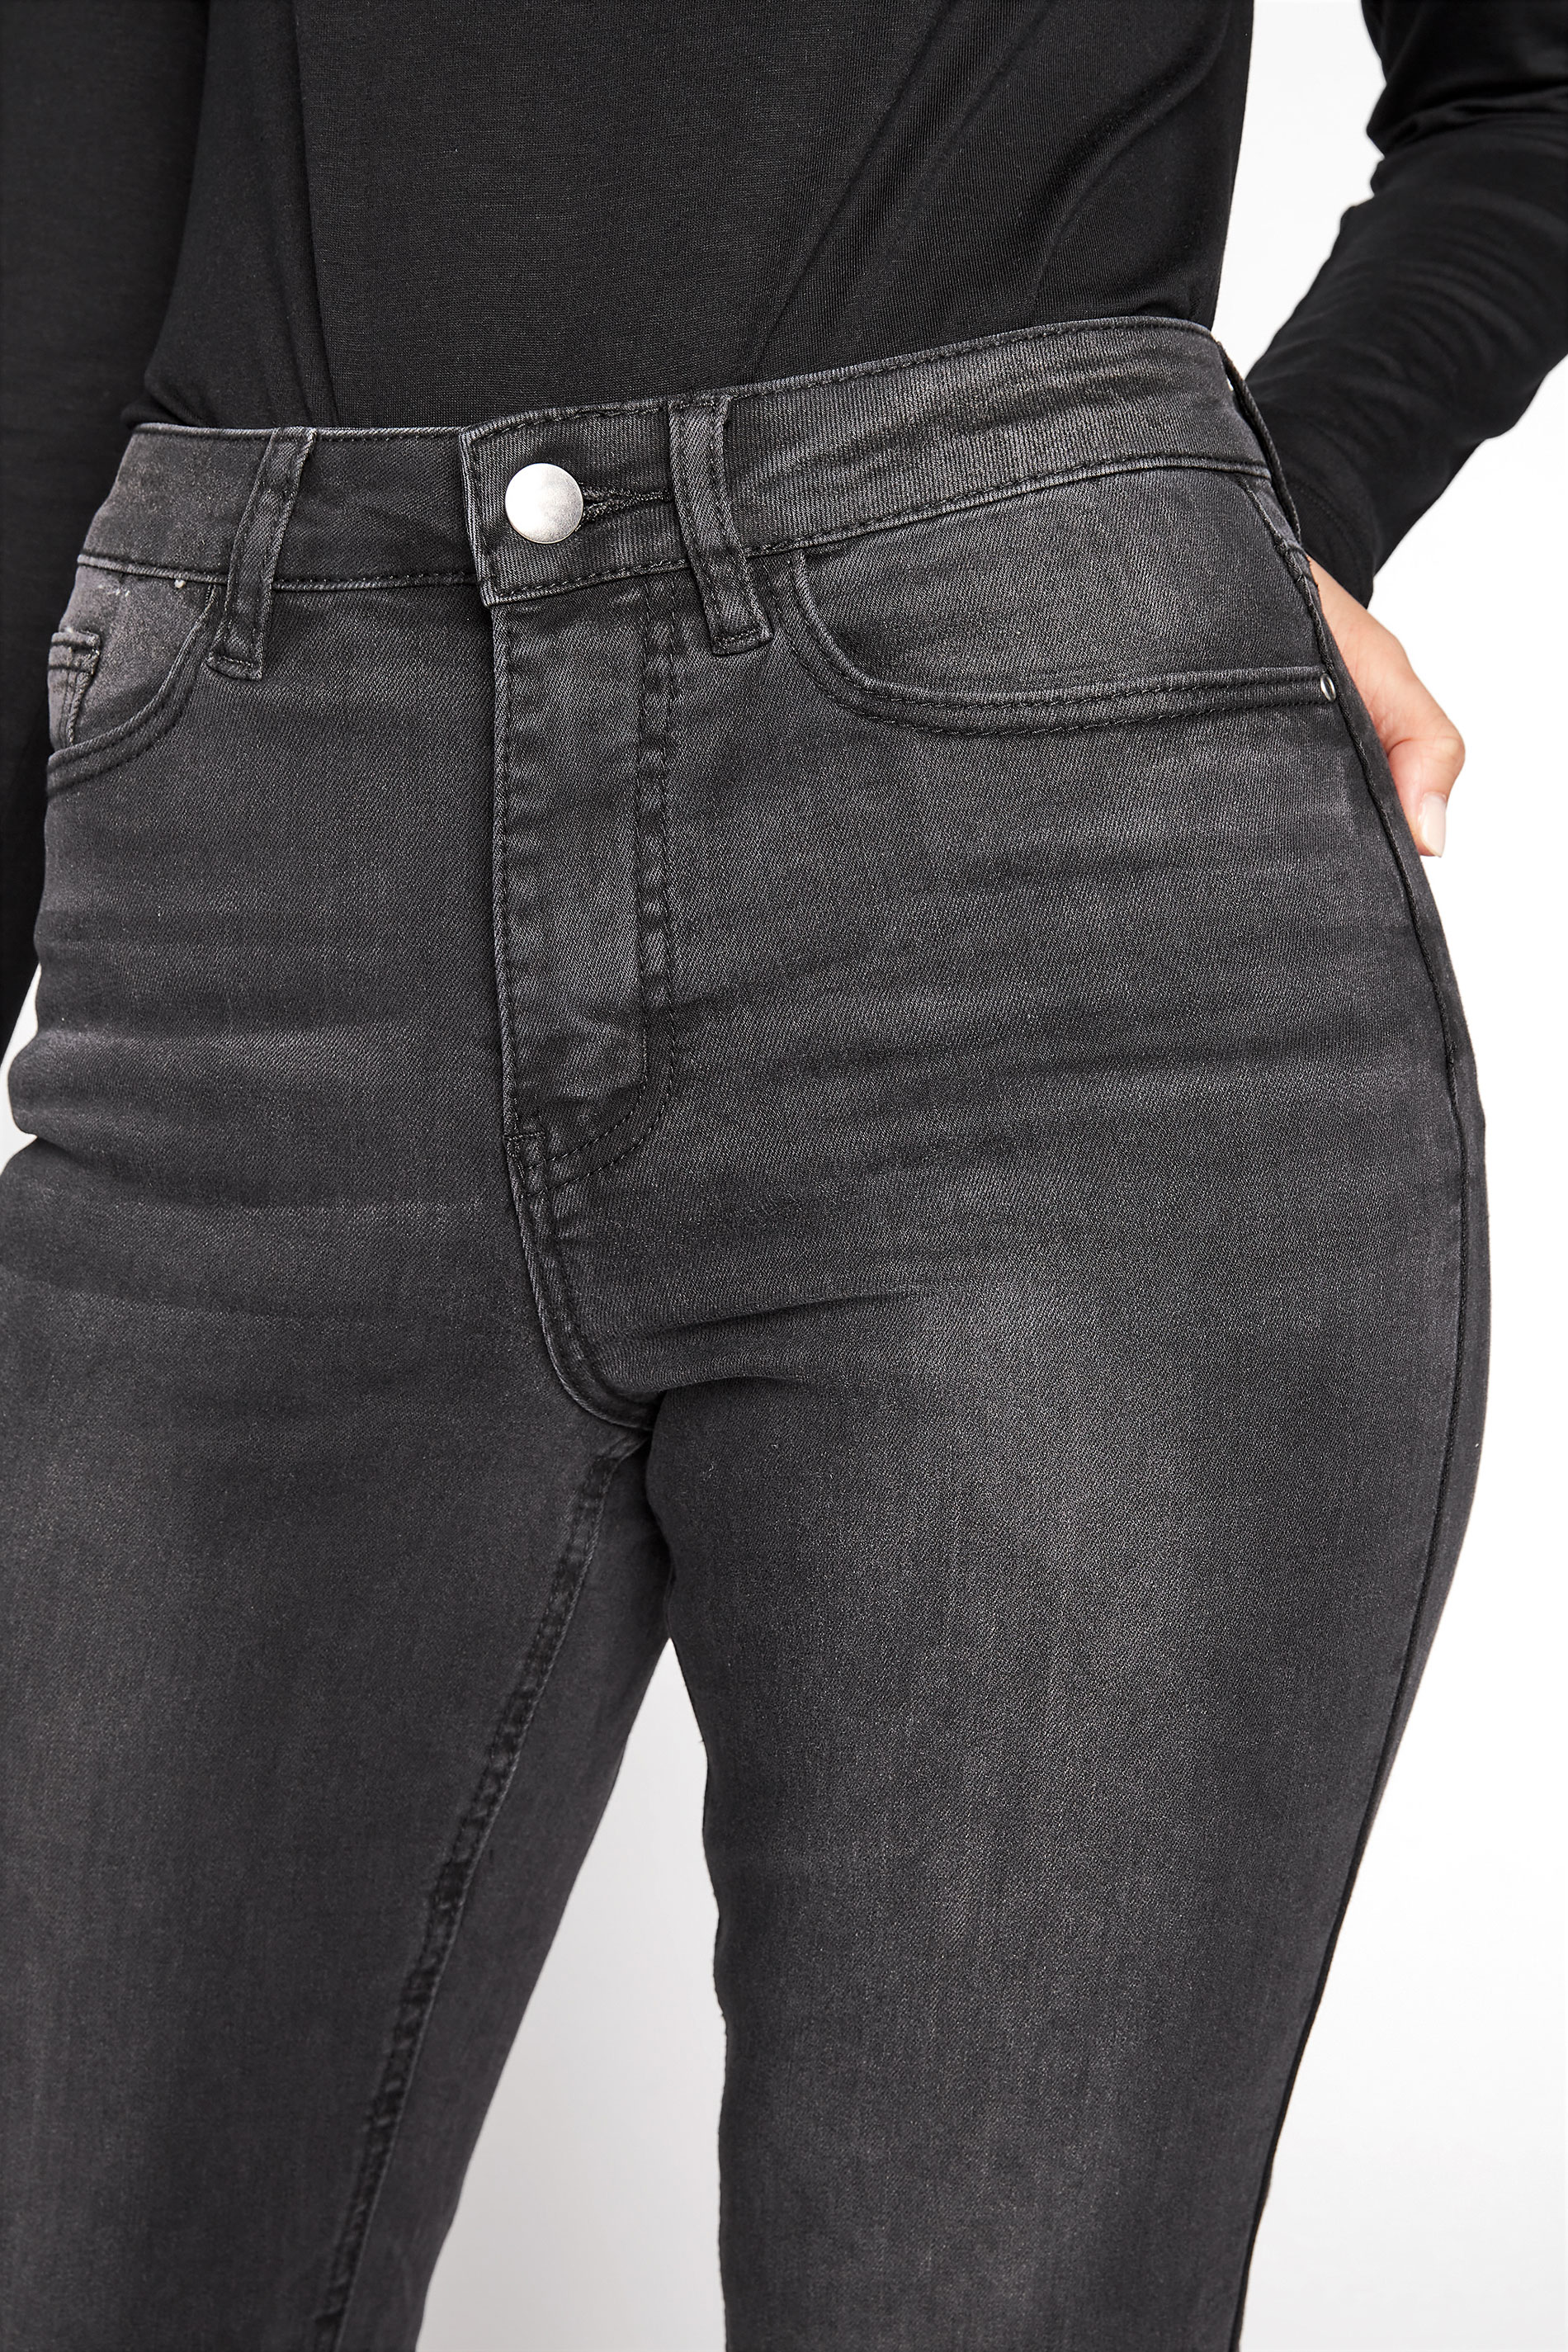 LTS MADE FOR GOOD Black Washed Straight Leg Jeans